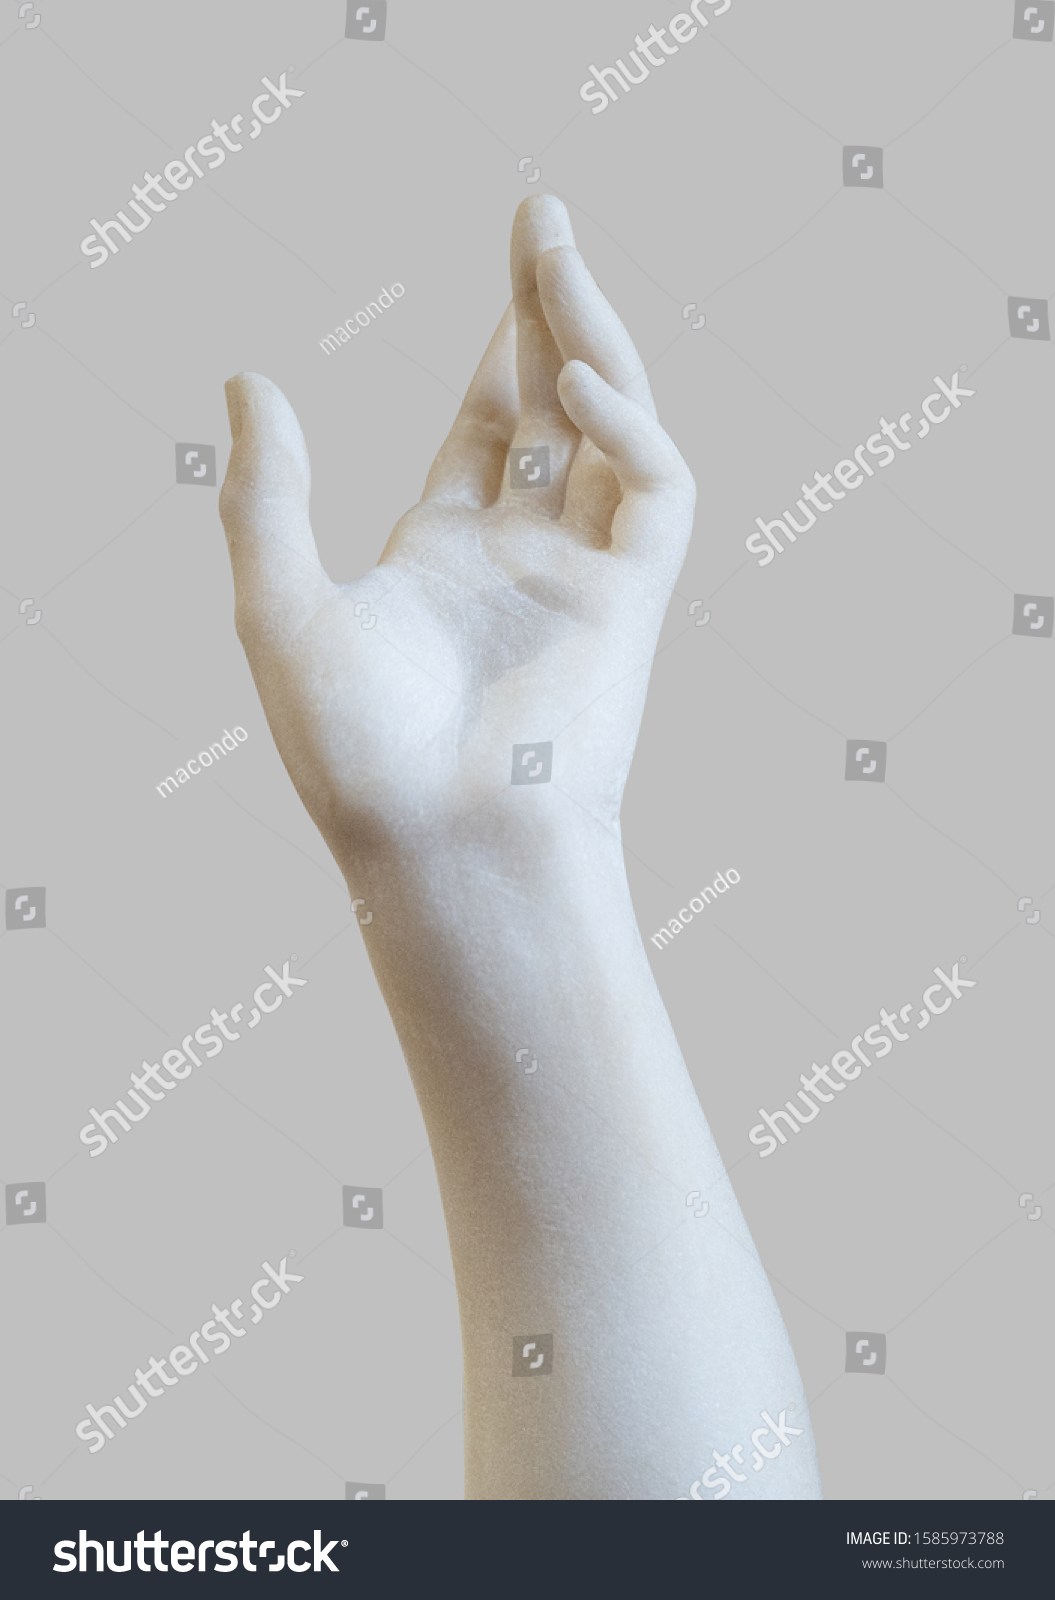 side view closeup of white stone marble statue hand reaching out to the heavens isolated on grey background #1585973788